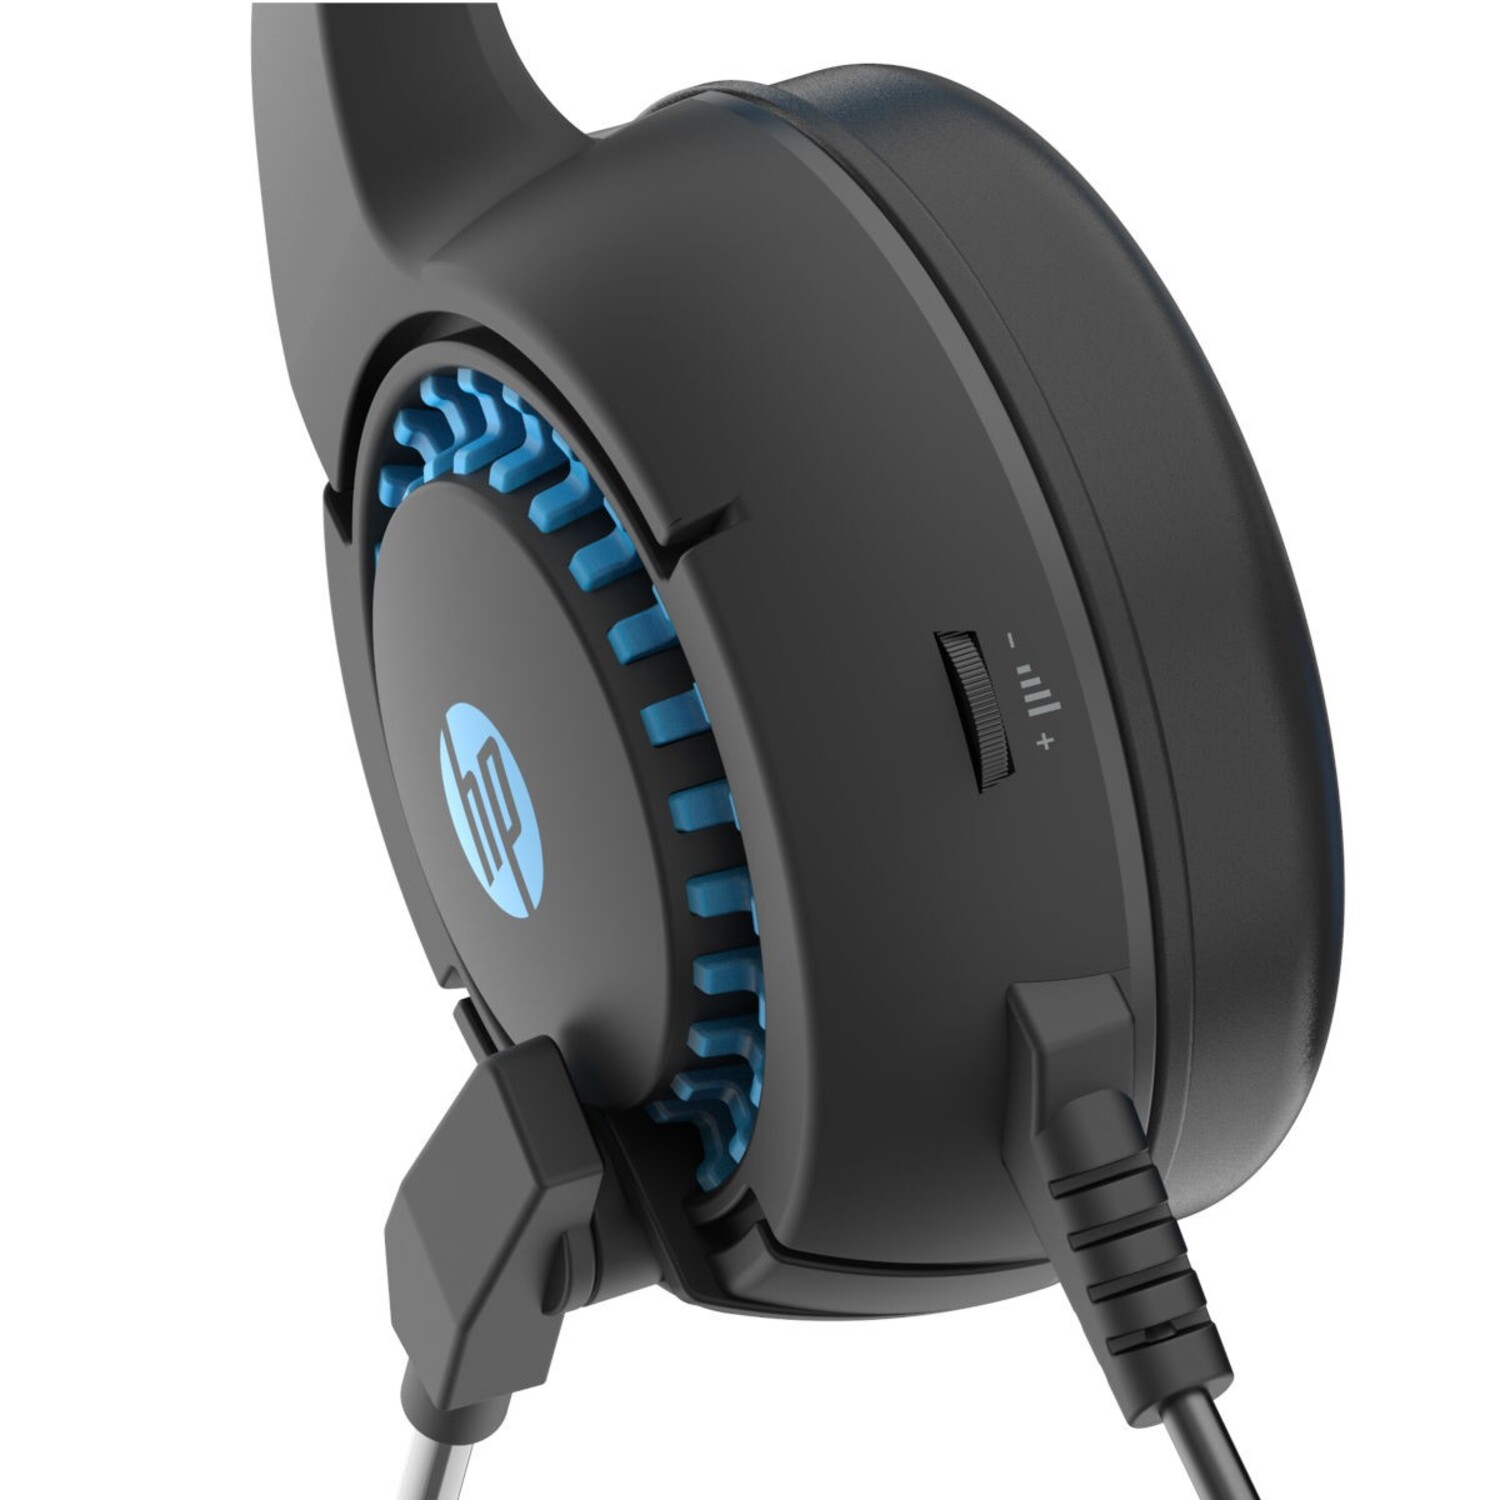 HP Stereo Gaming Headset For Smartphone PC 